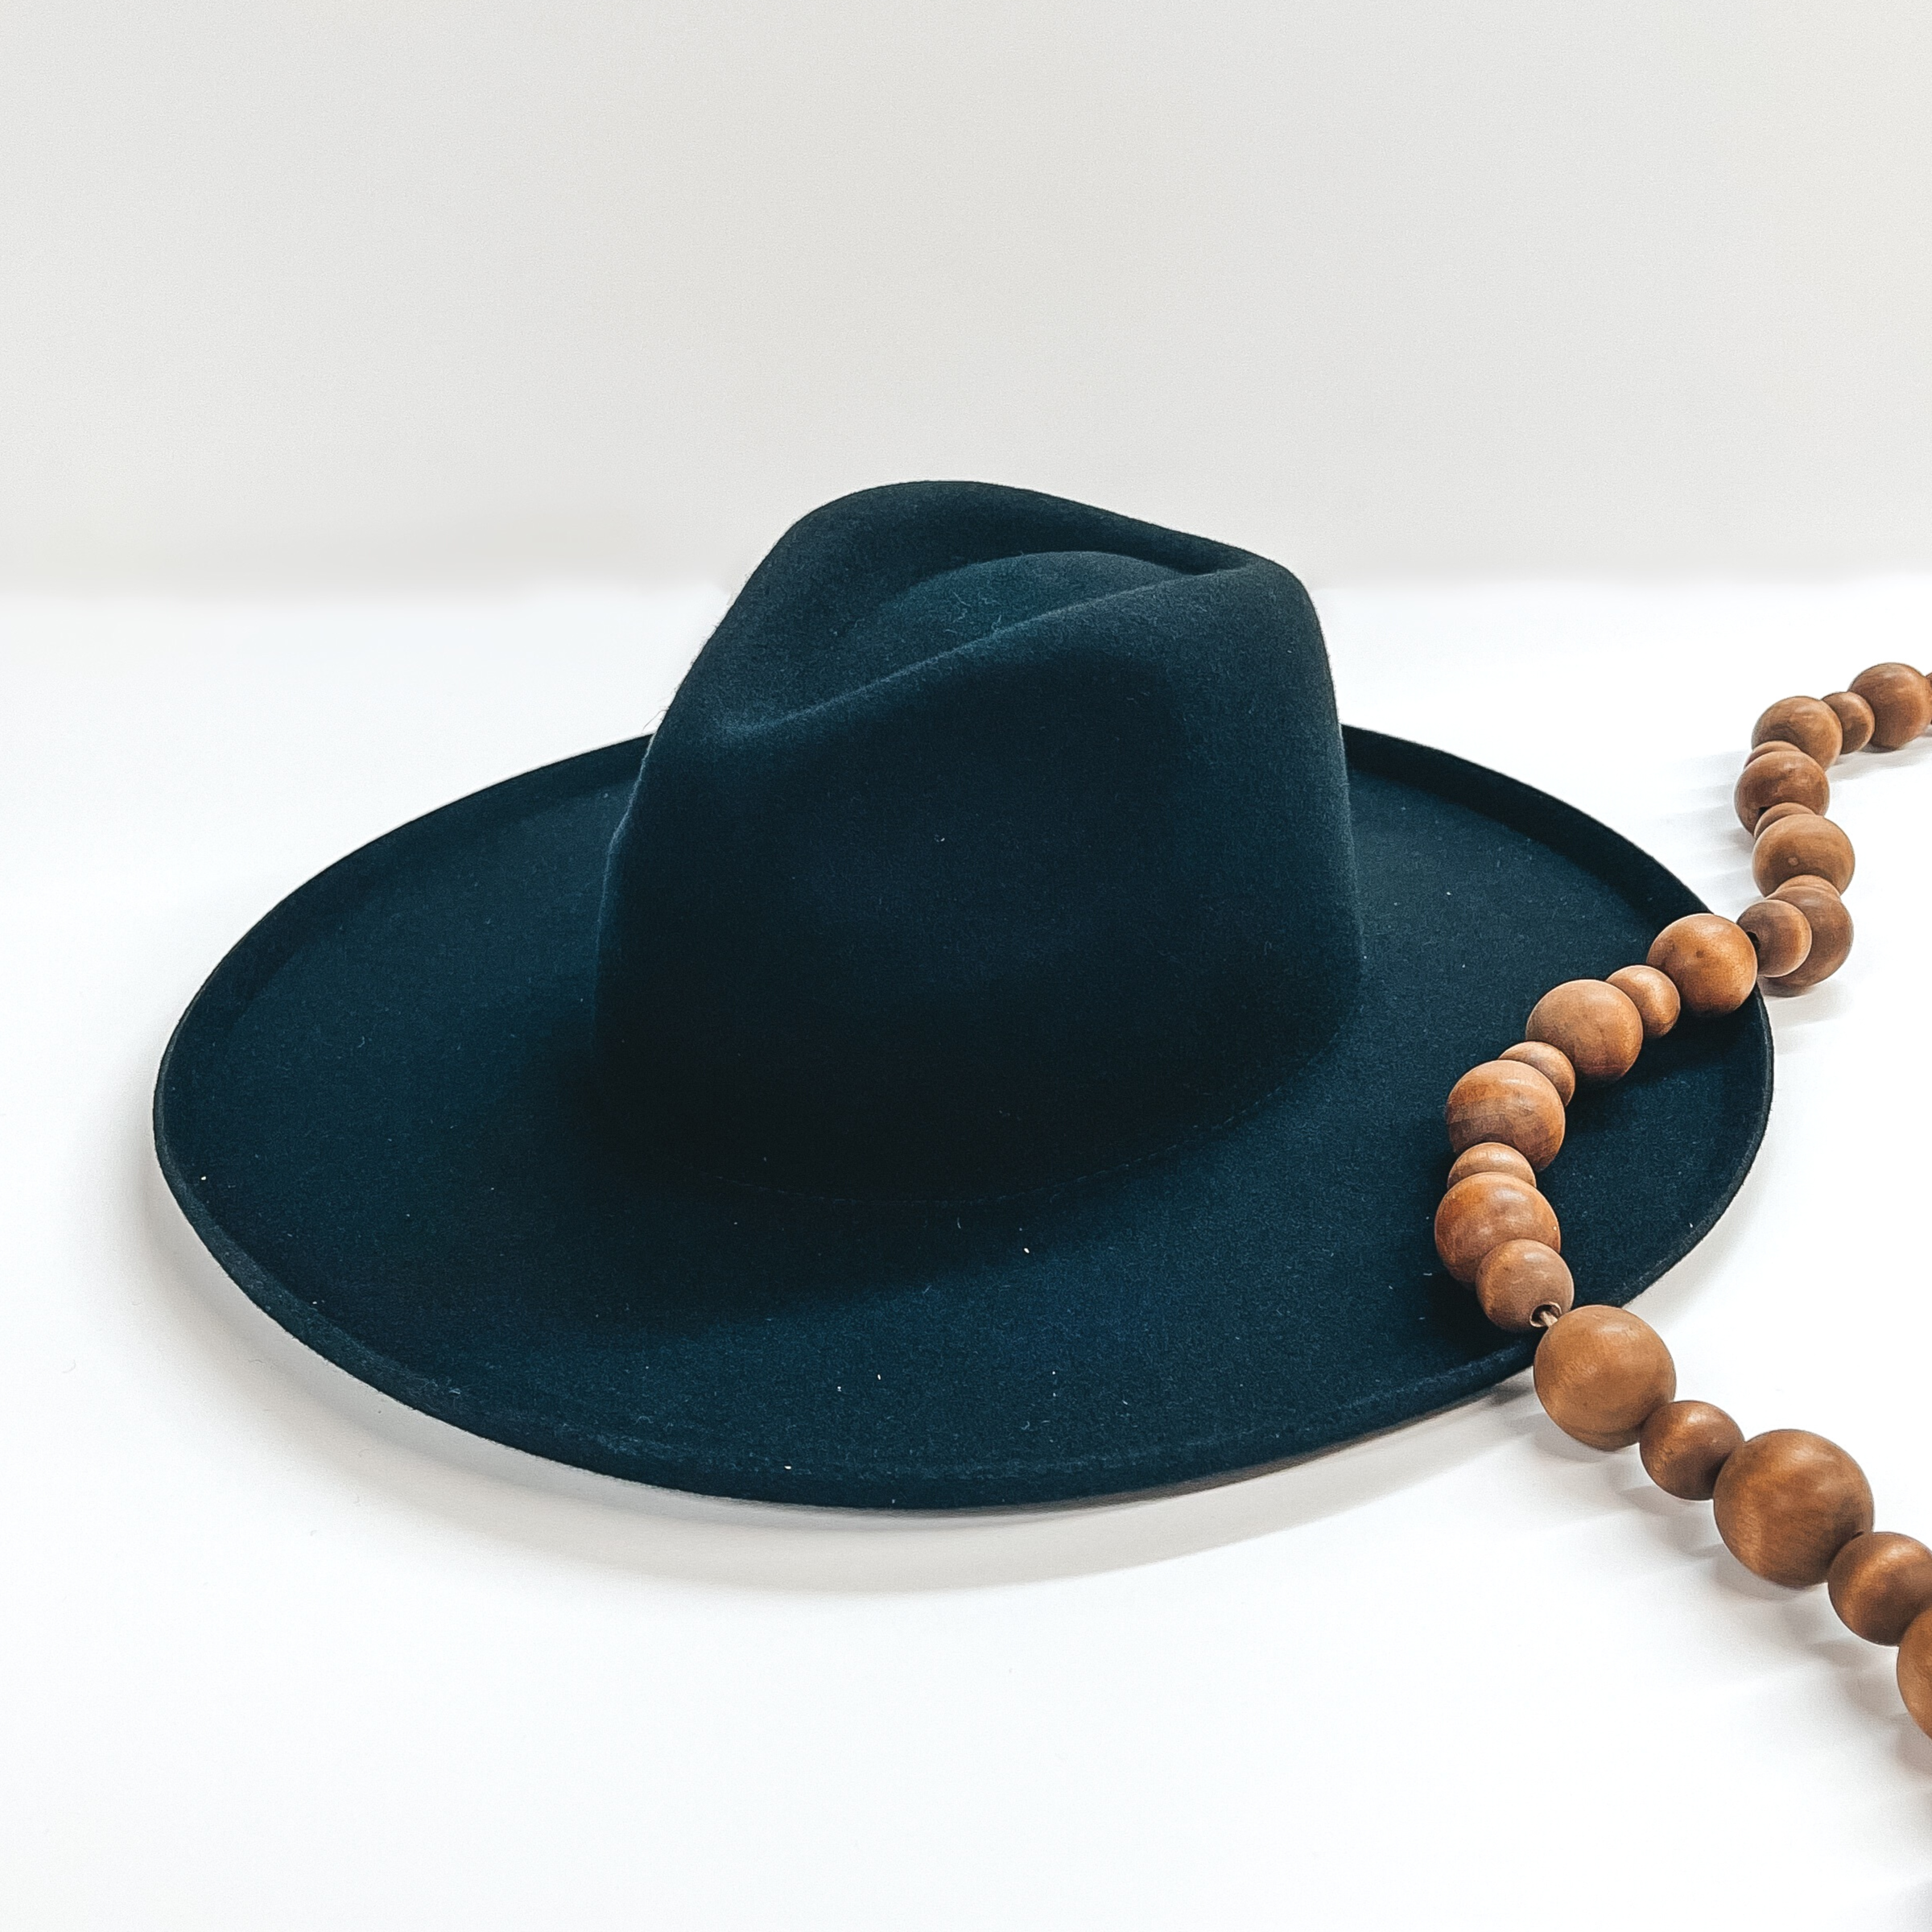 Black felt hat with a triangle top and a flat rbim with a flipped up edge. This hat is pictured on a white background with brown decorative beads. 